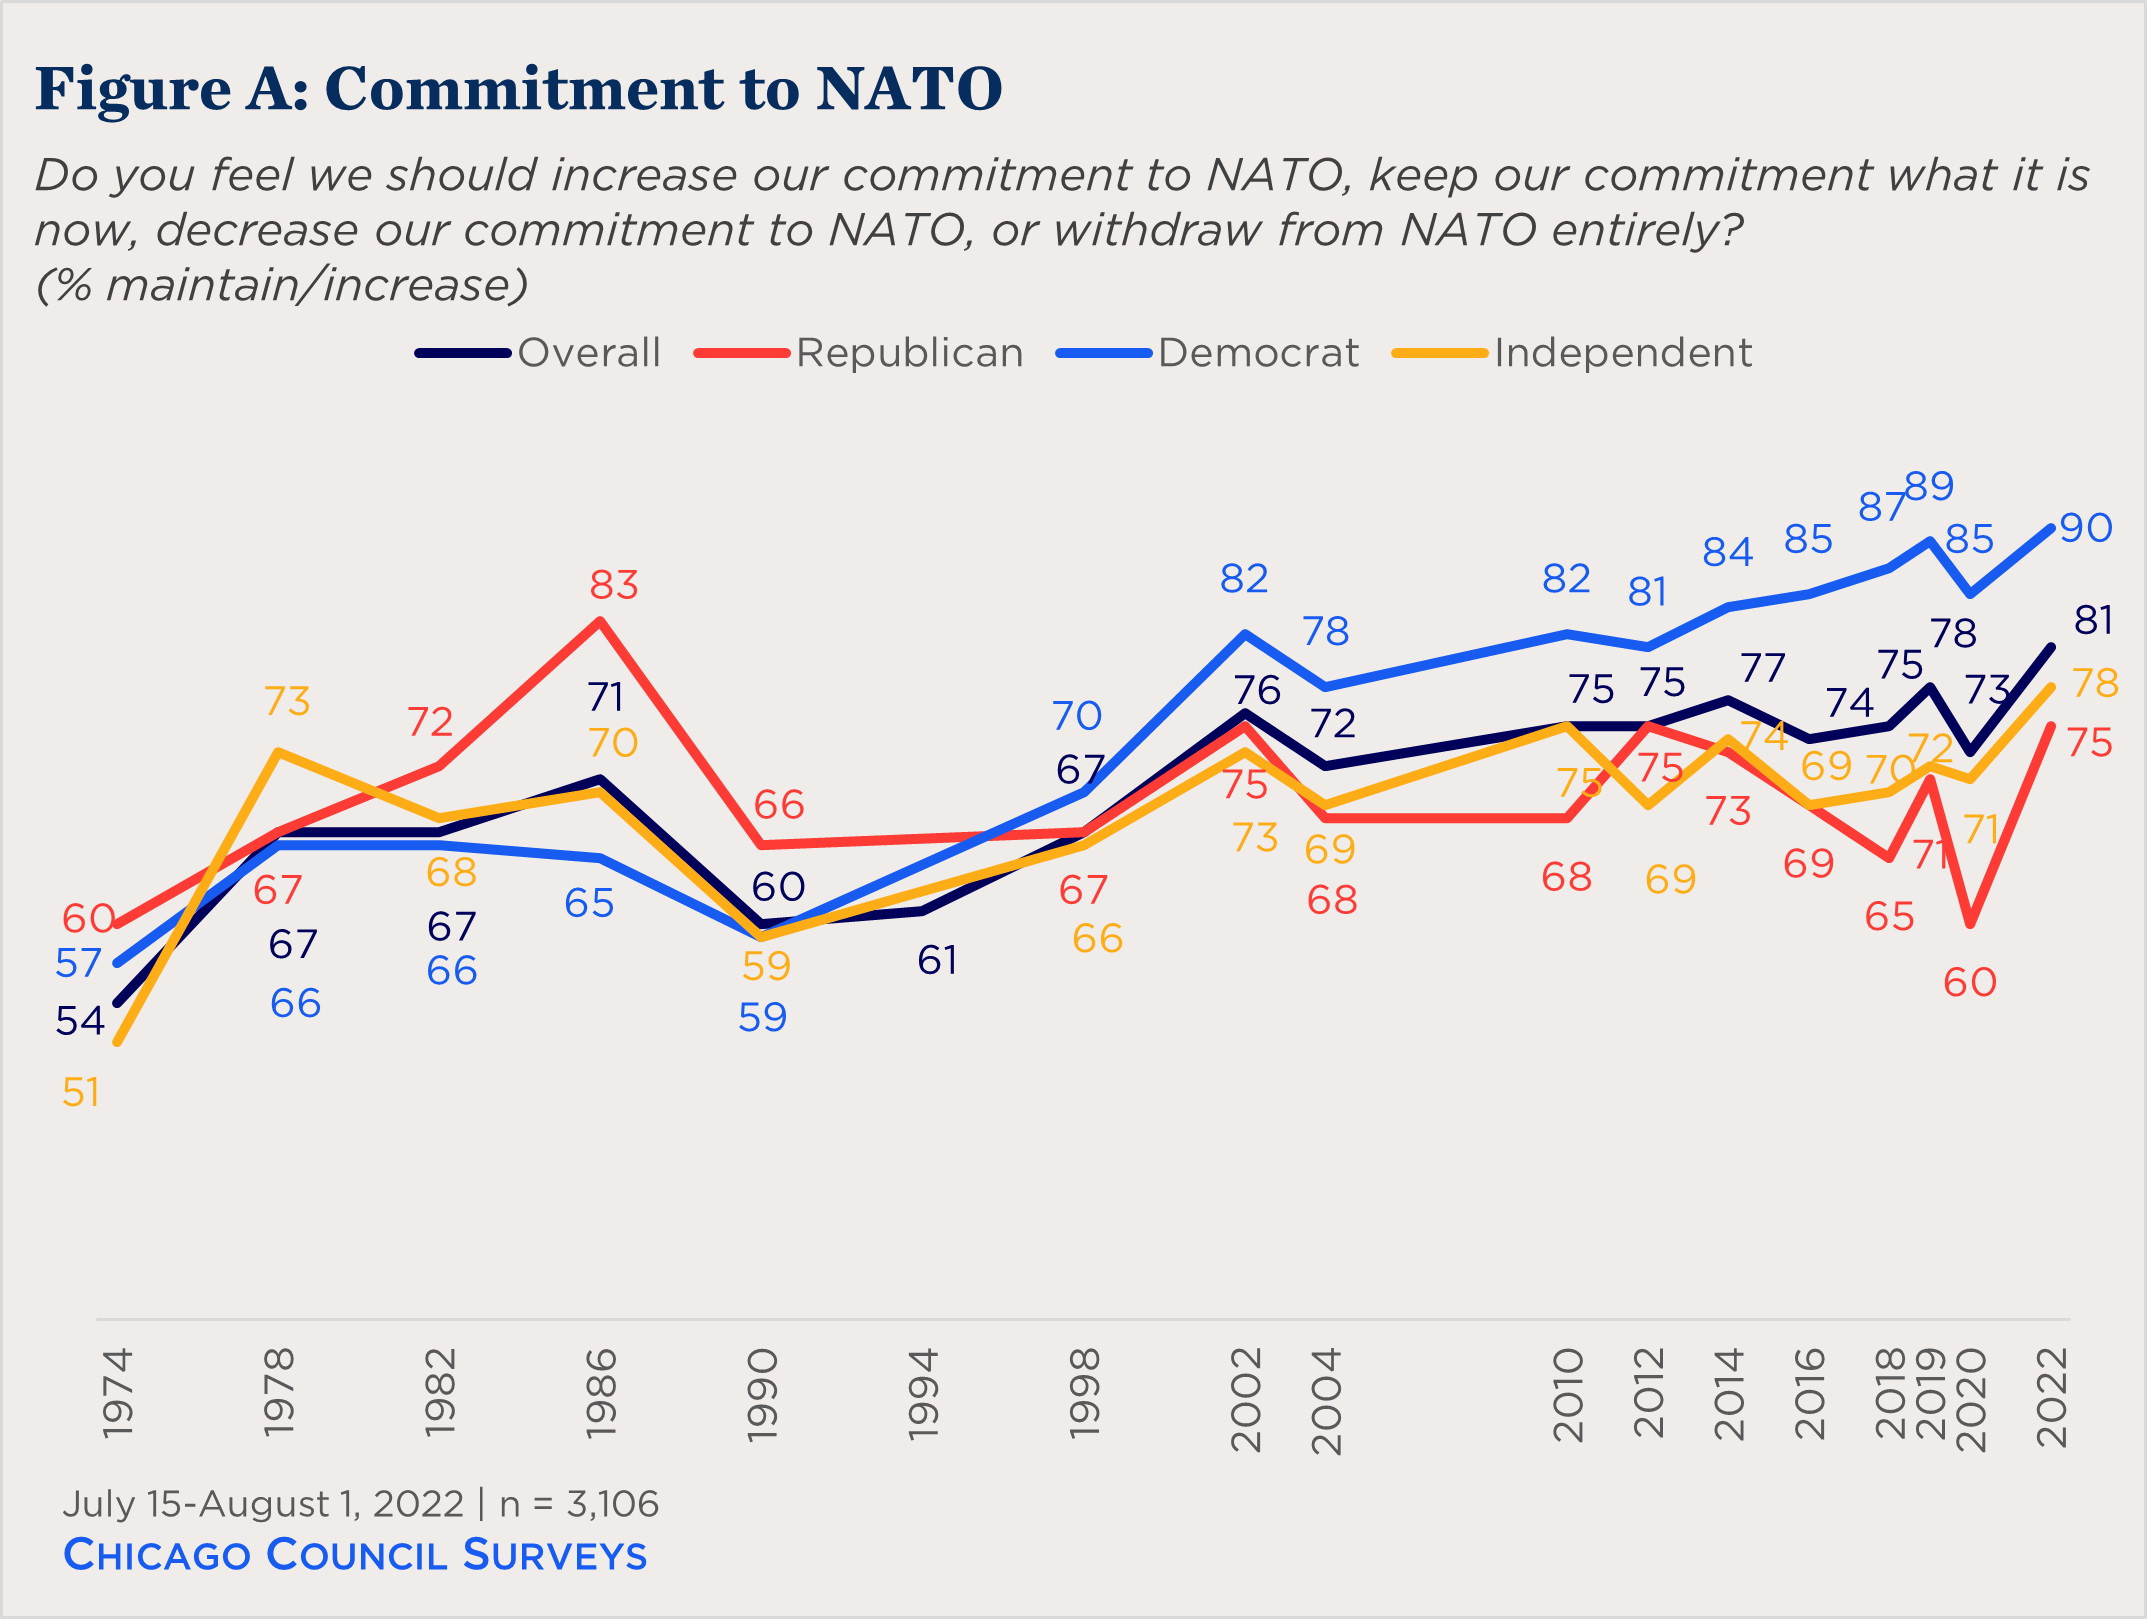 "line chart showing partisan views of US commitment to NATO over time"